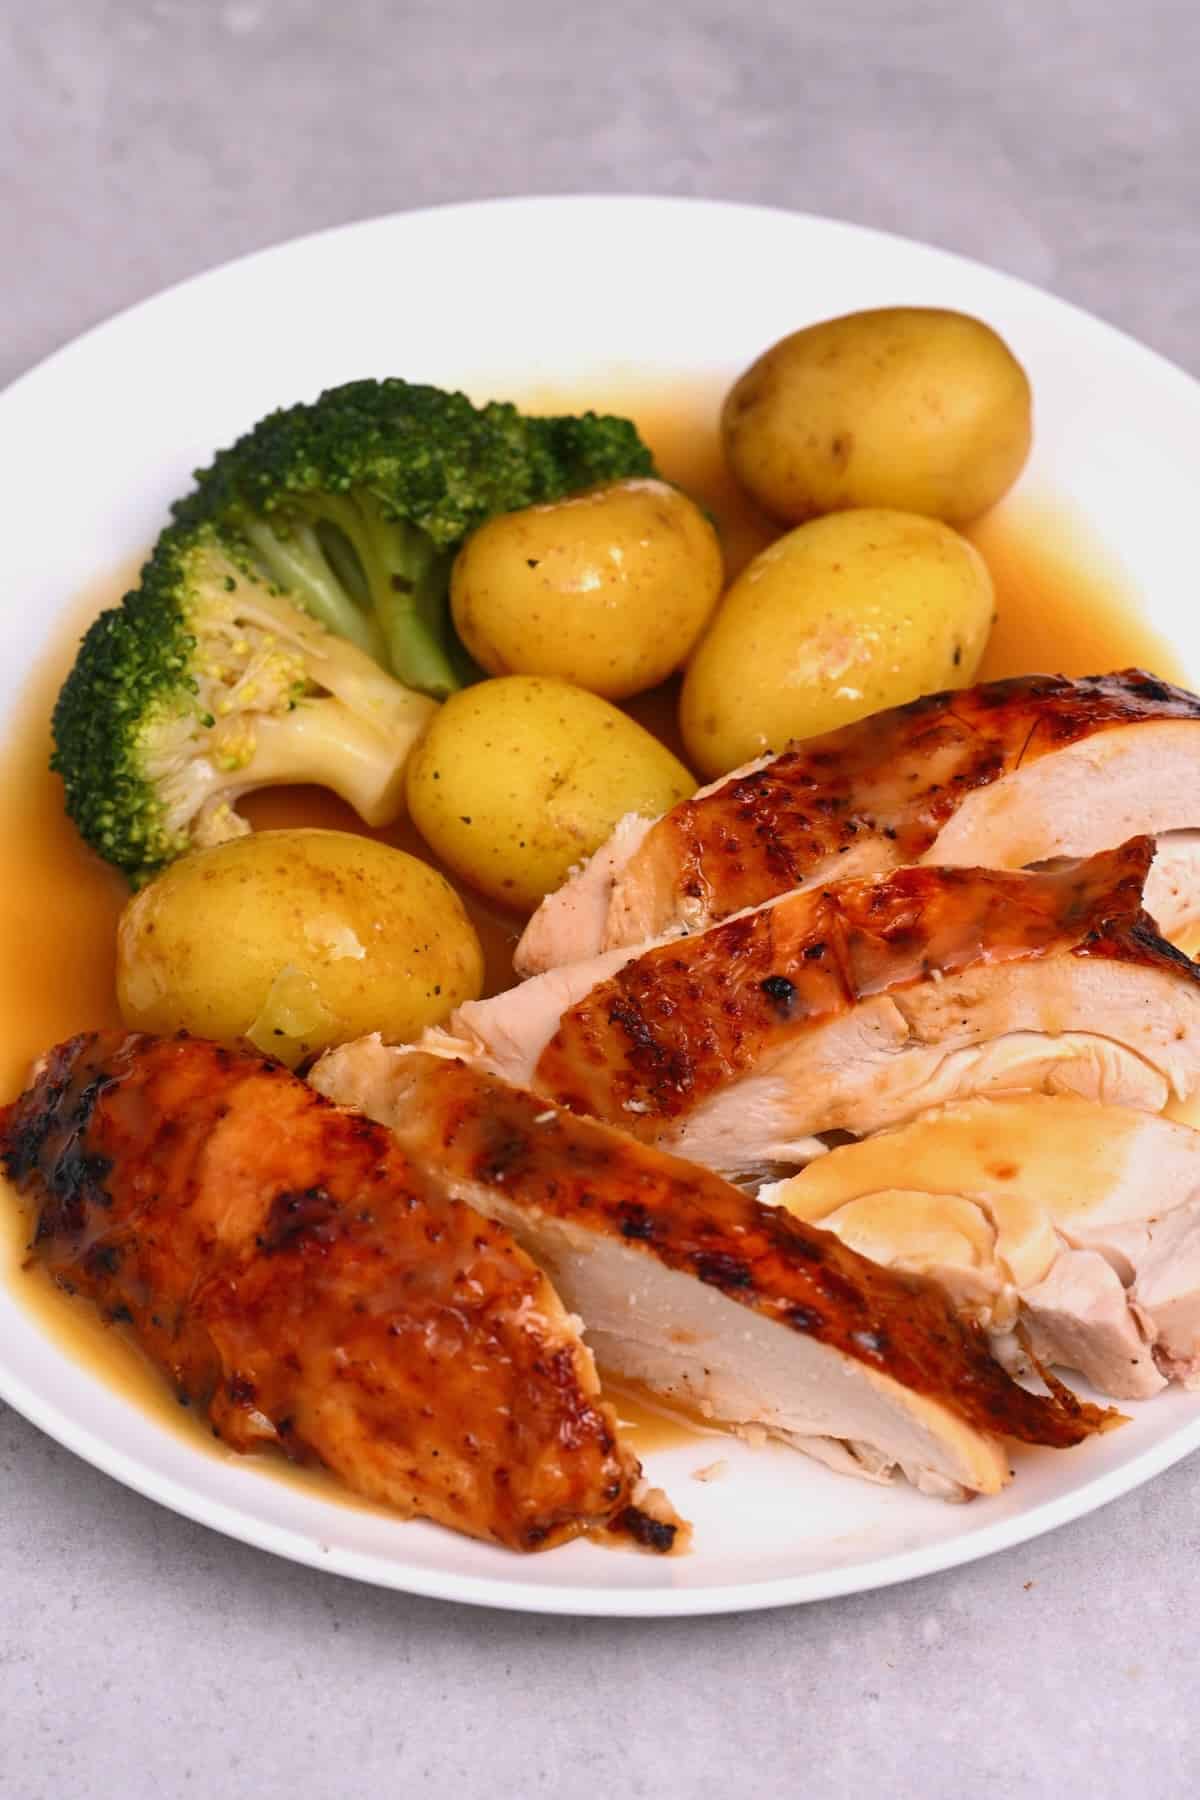 A portion of brined chicken with vegetables